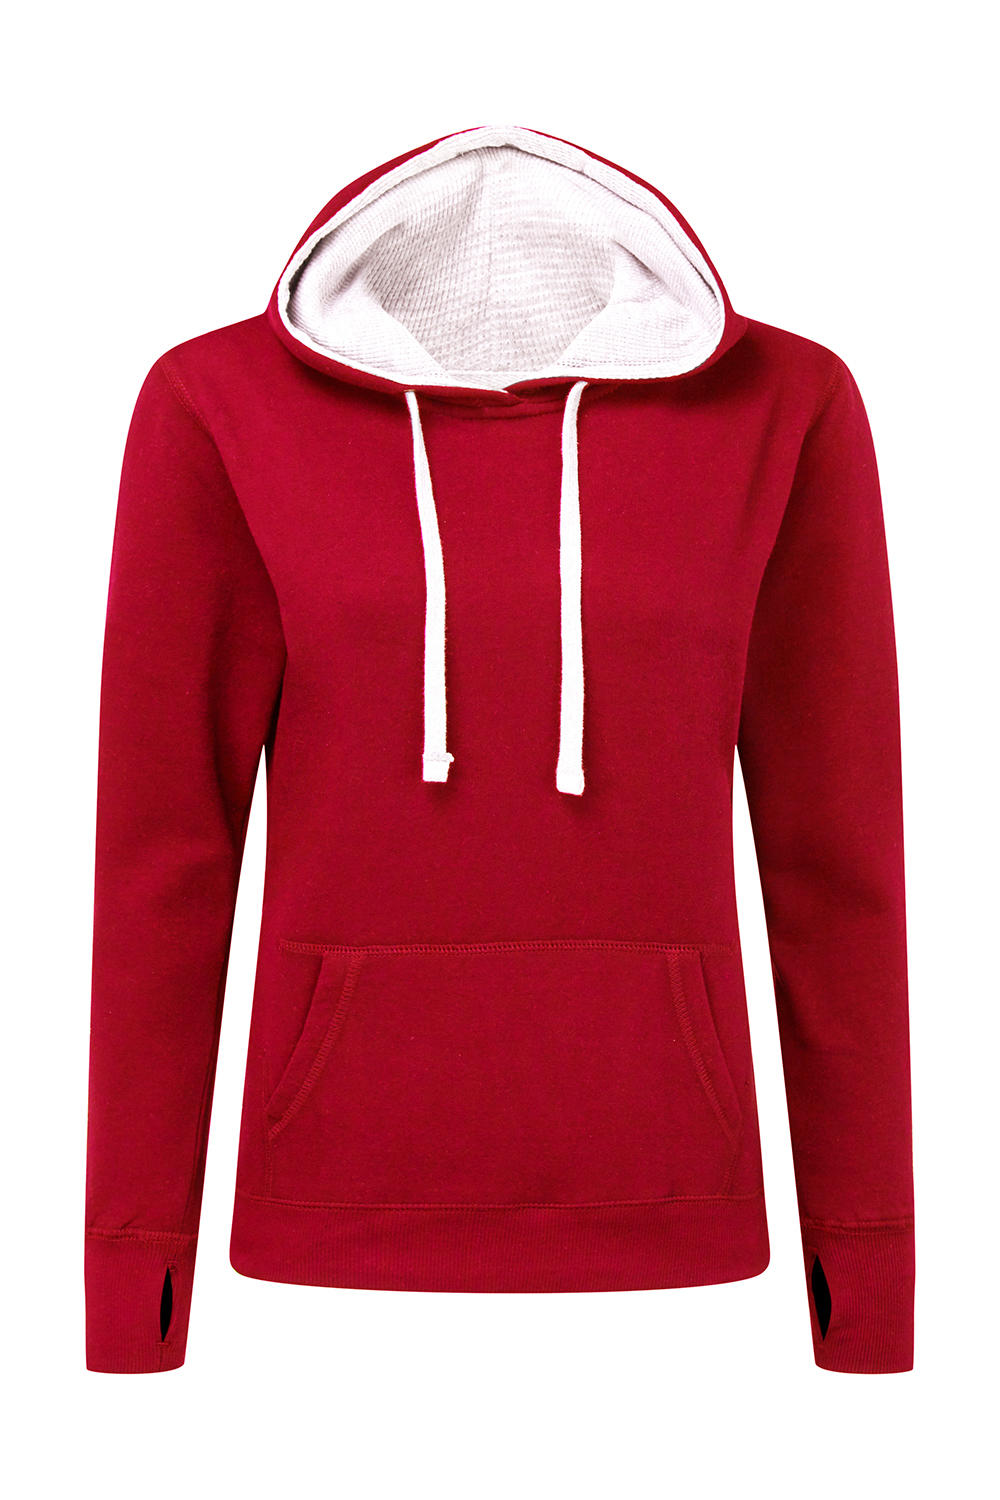  Ladies Contrast Hoodie in Farbe Red/White